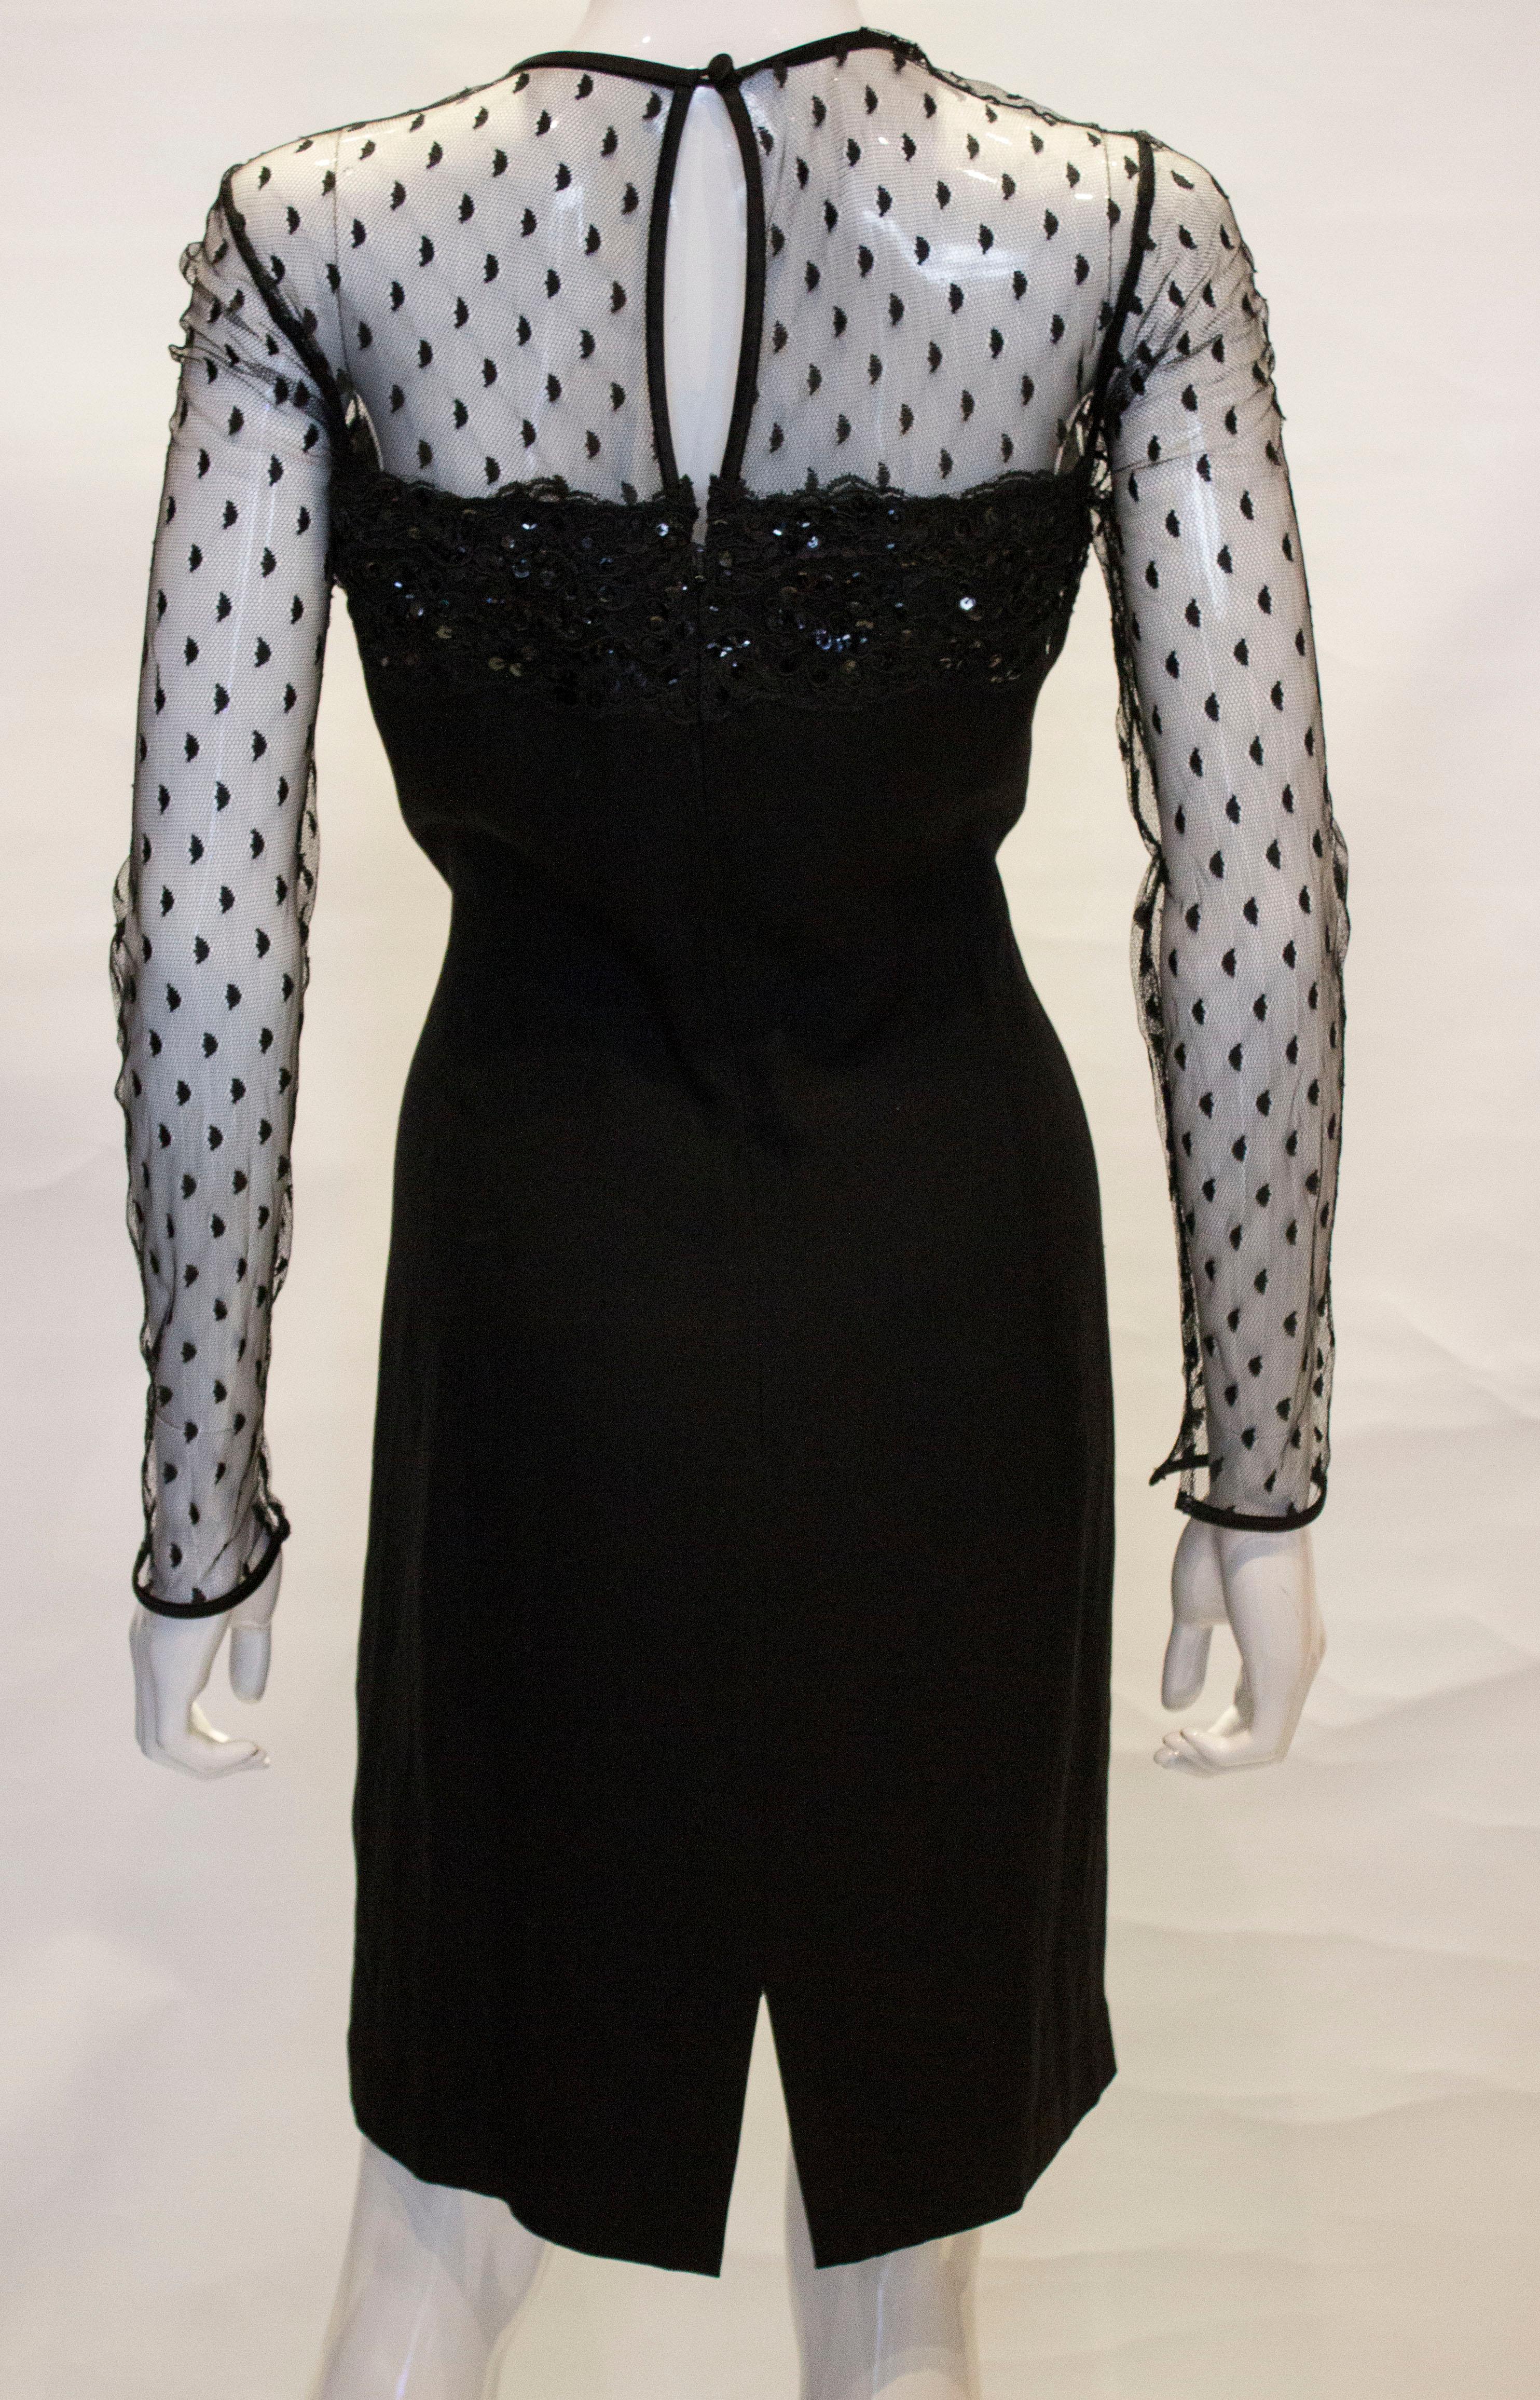 Black Cocktail dress by Adrienne Vittadini For Sale 2